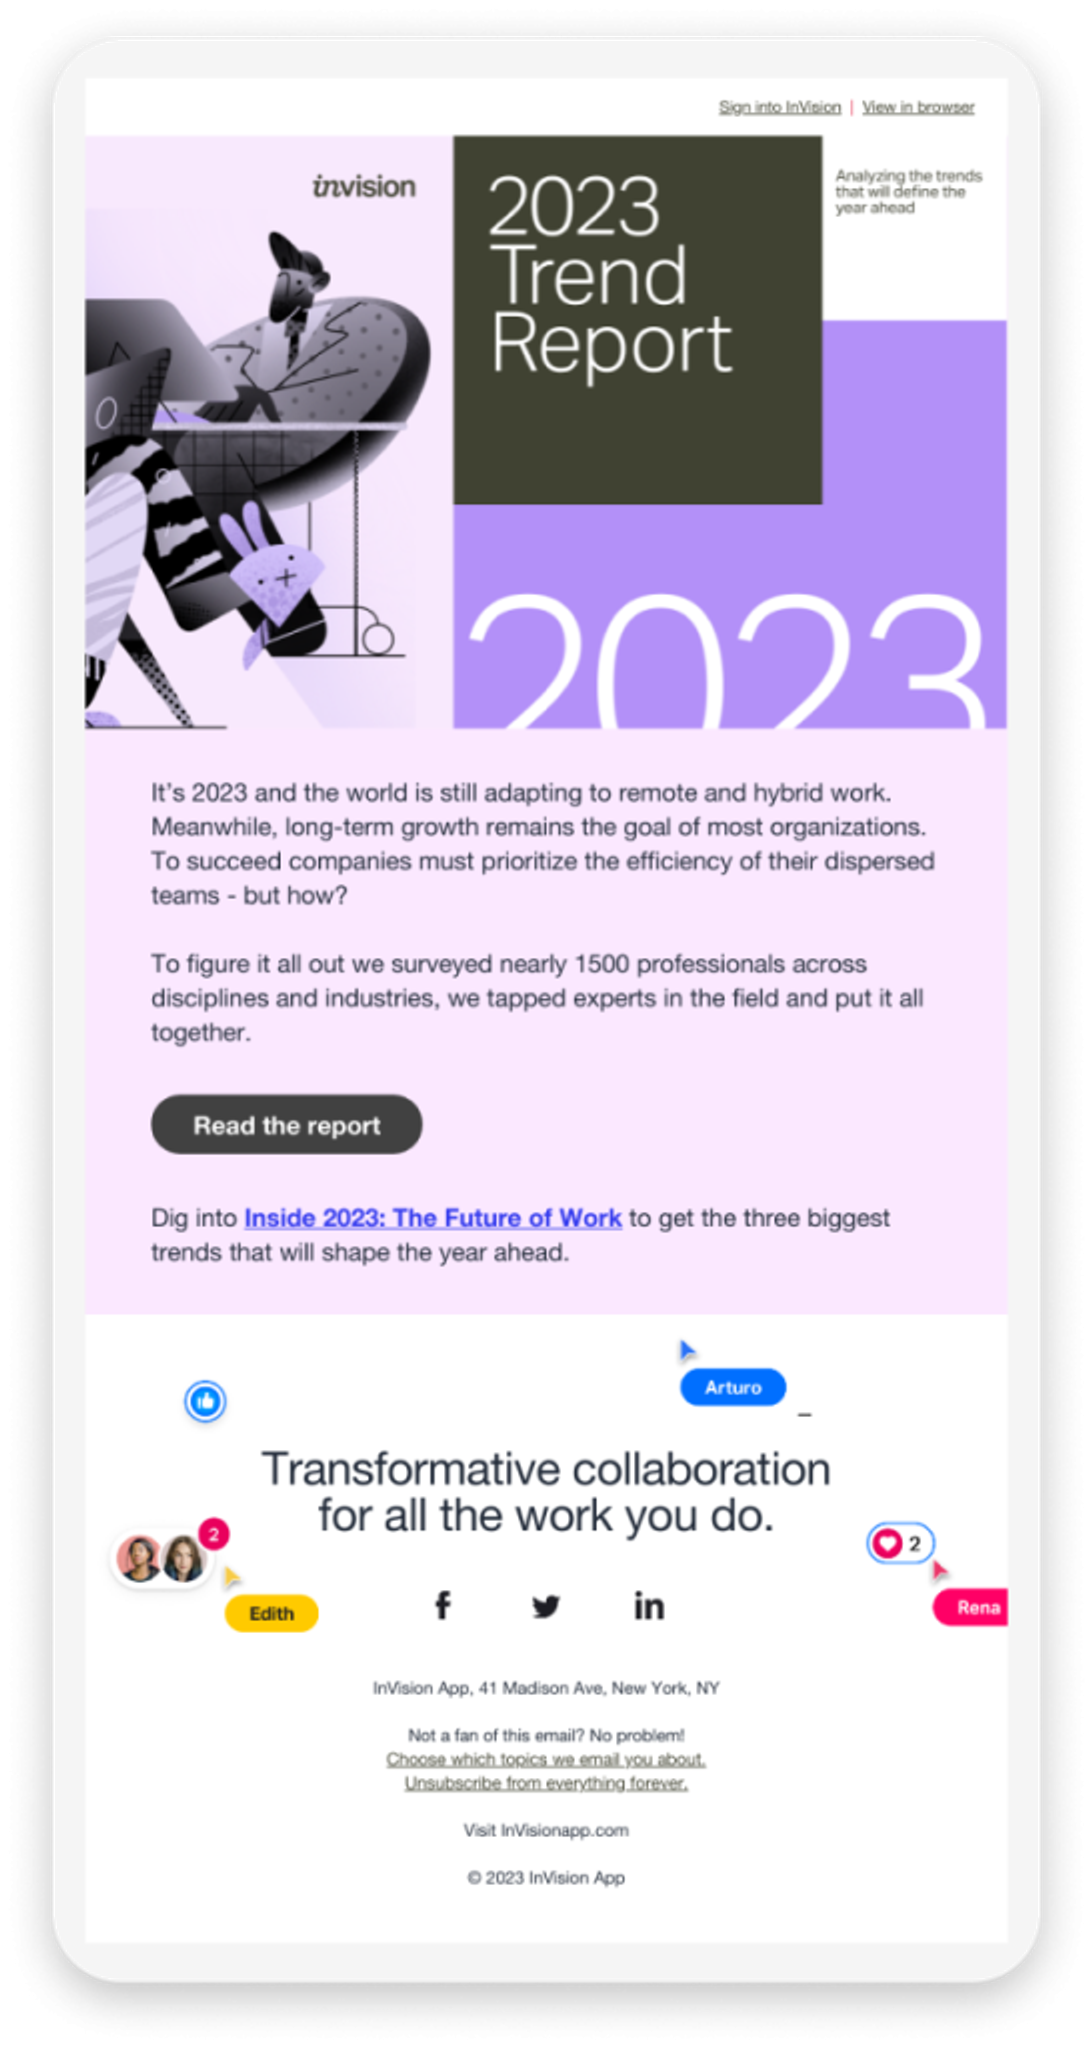 InVision – Inside 2023: The Future of Work